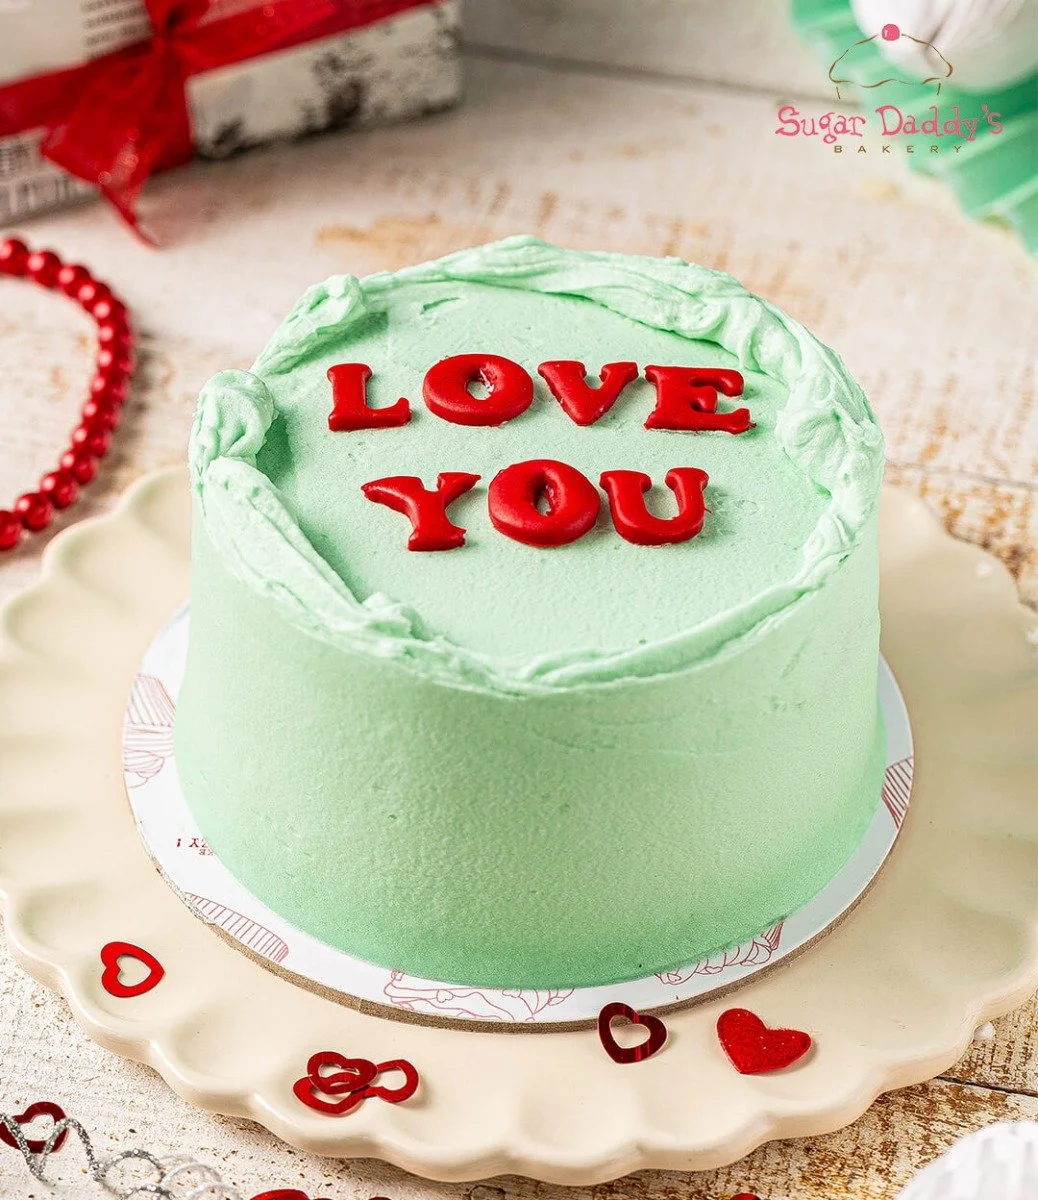 Love You Lunch Box Cake By Sugar Daddy'S Bakery 